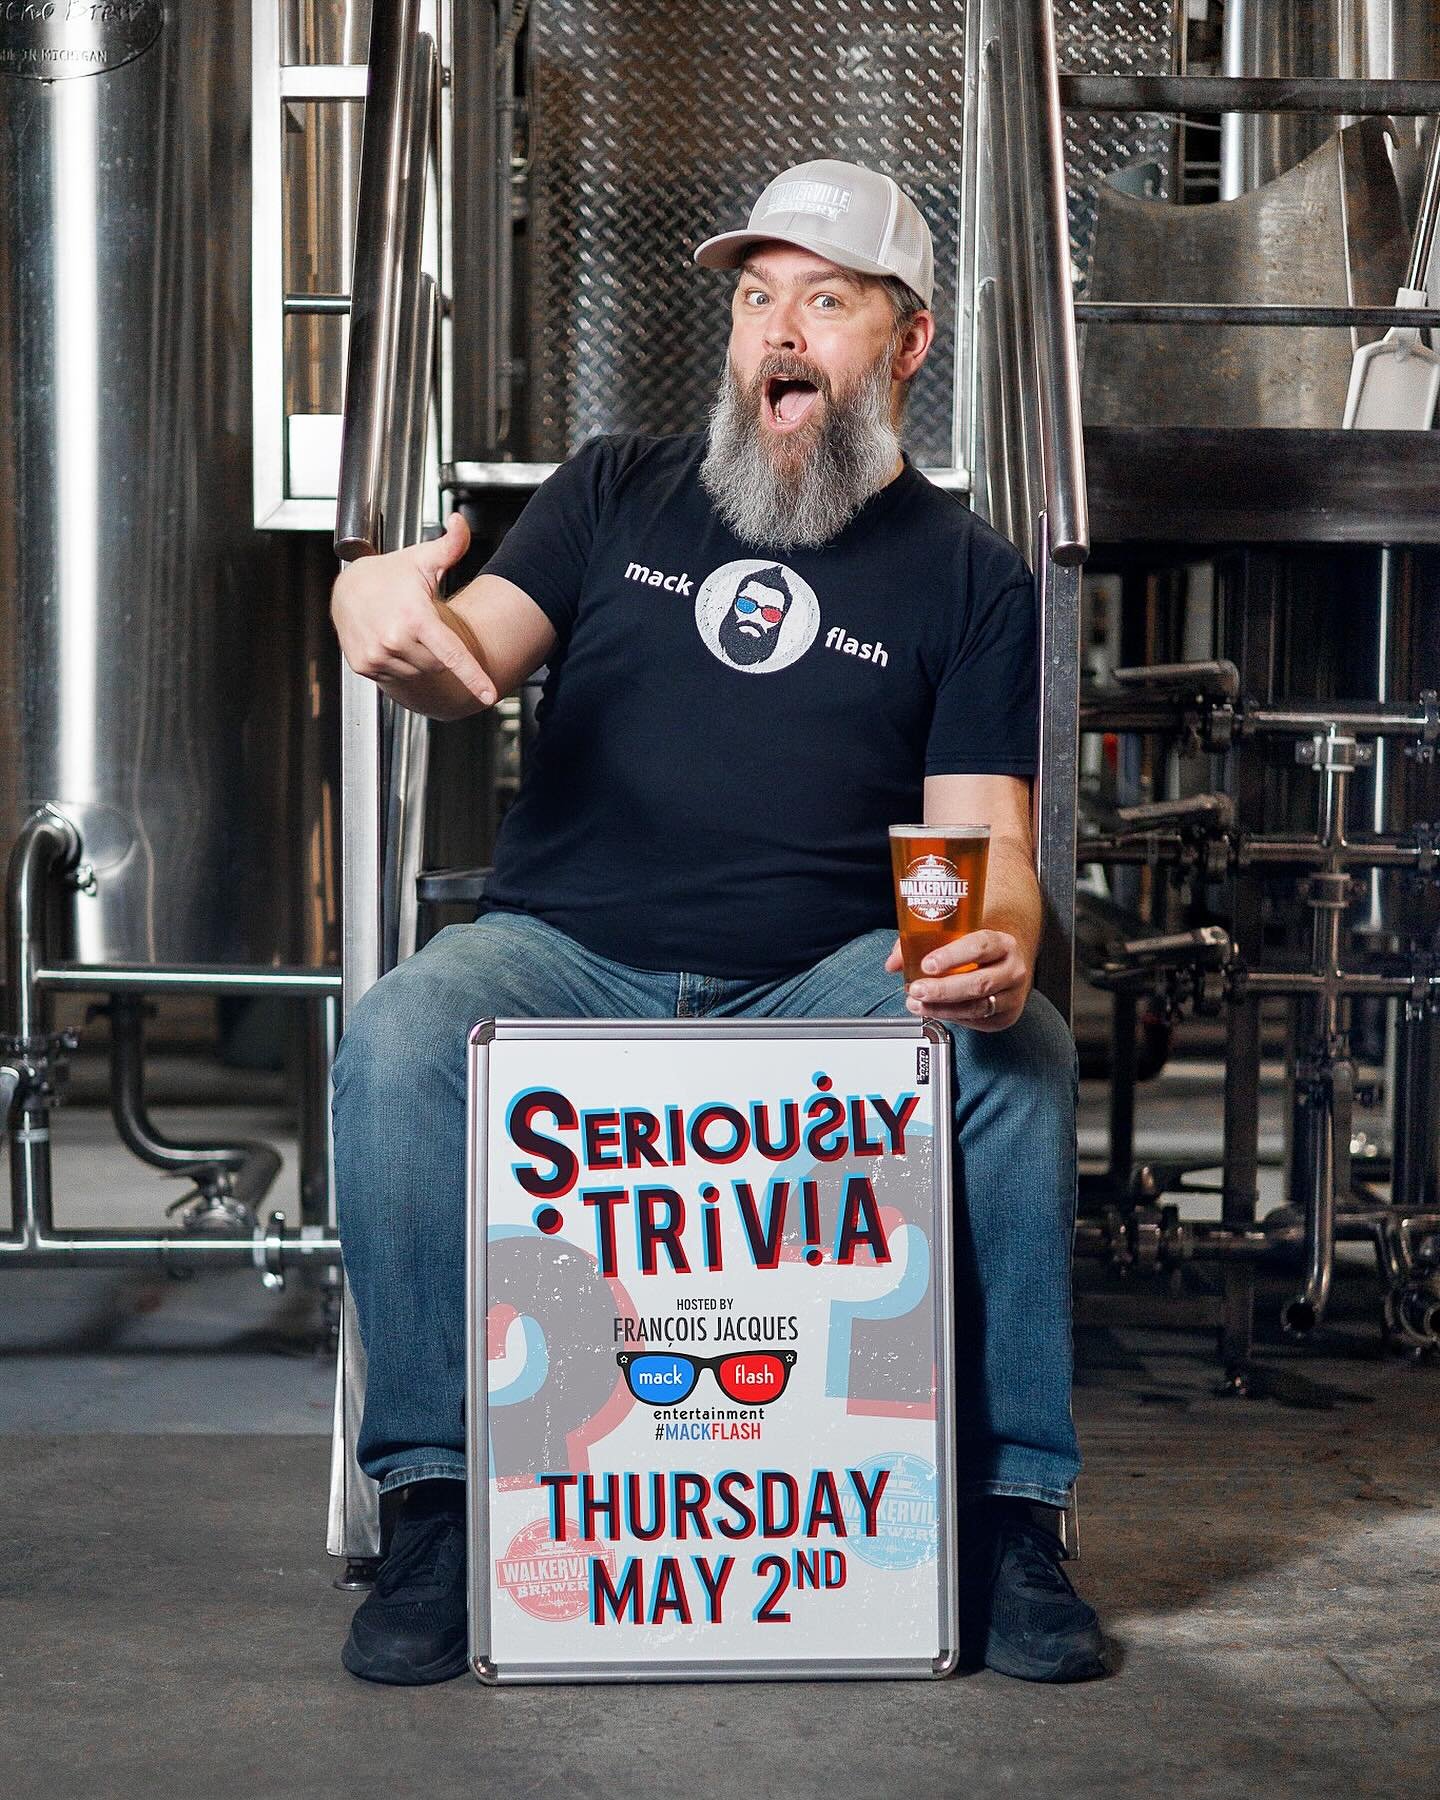 Q: What&rsquo;s happening THIS Thursday at Walkerville Brewery?

A: SERIOUSLY TRIVIA!

The quizmaster himself @mackflash will be here Thursday, May 2nd at 6:30pm for a night of trivia fun! Seriously Trivia is always free to play and great prizes to b